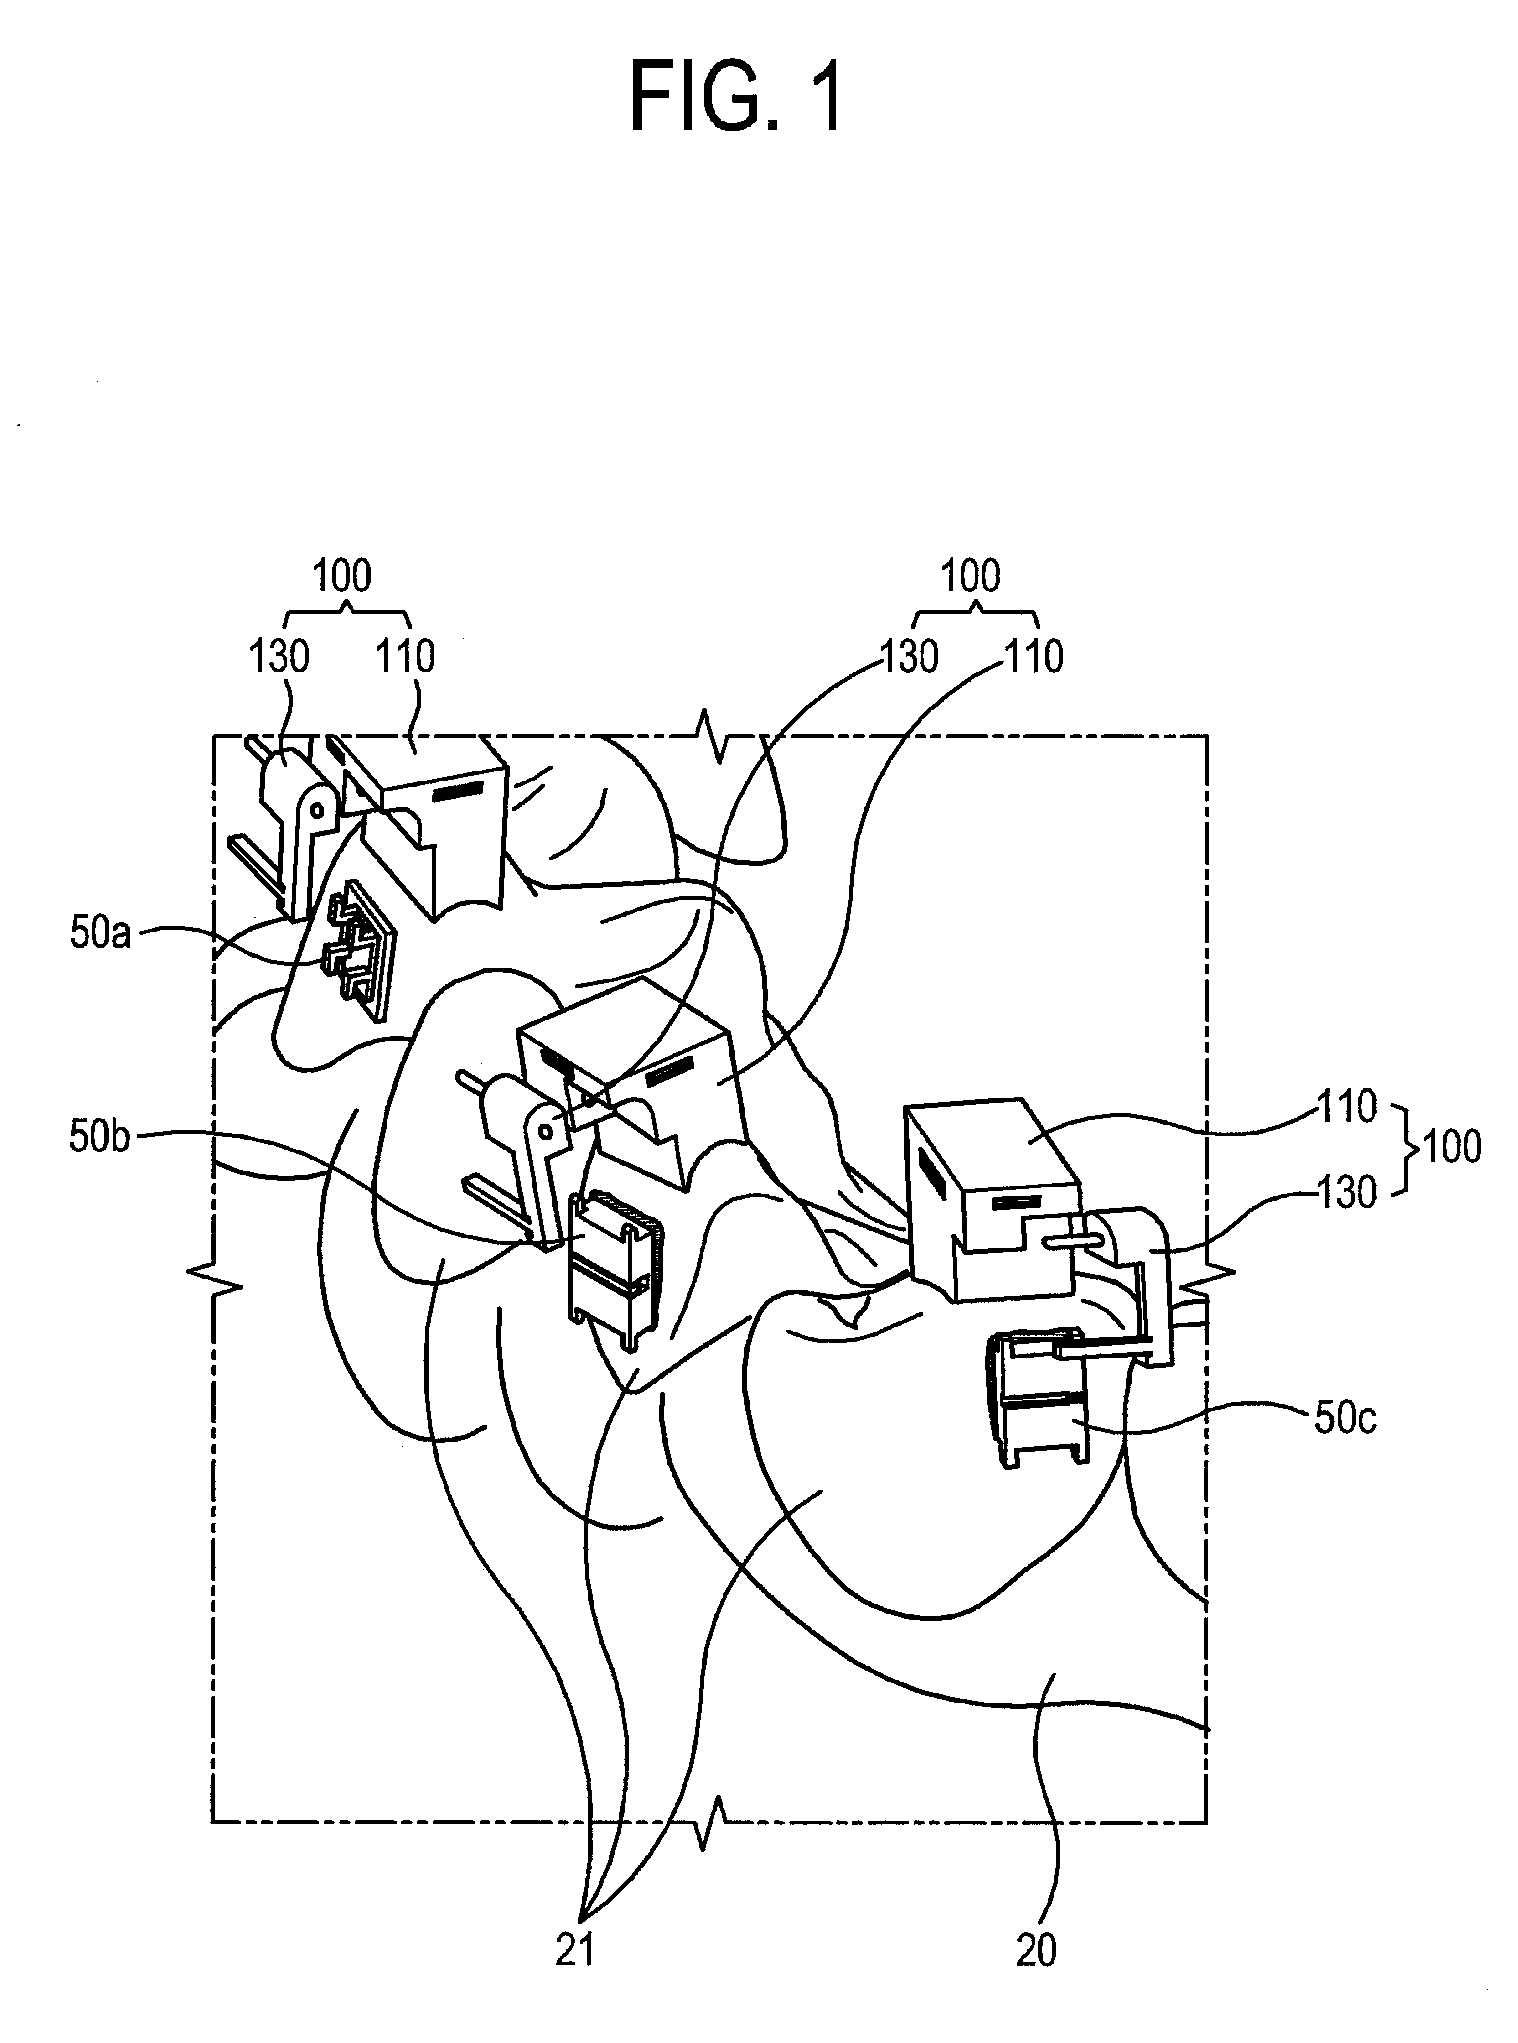 Transfer jig for bracket or tube, manufacturing and using method thereof